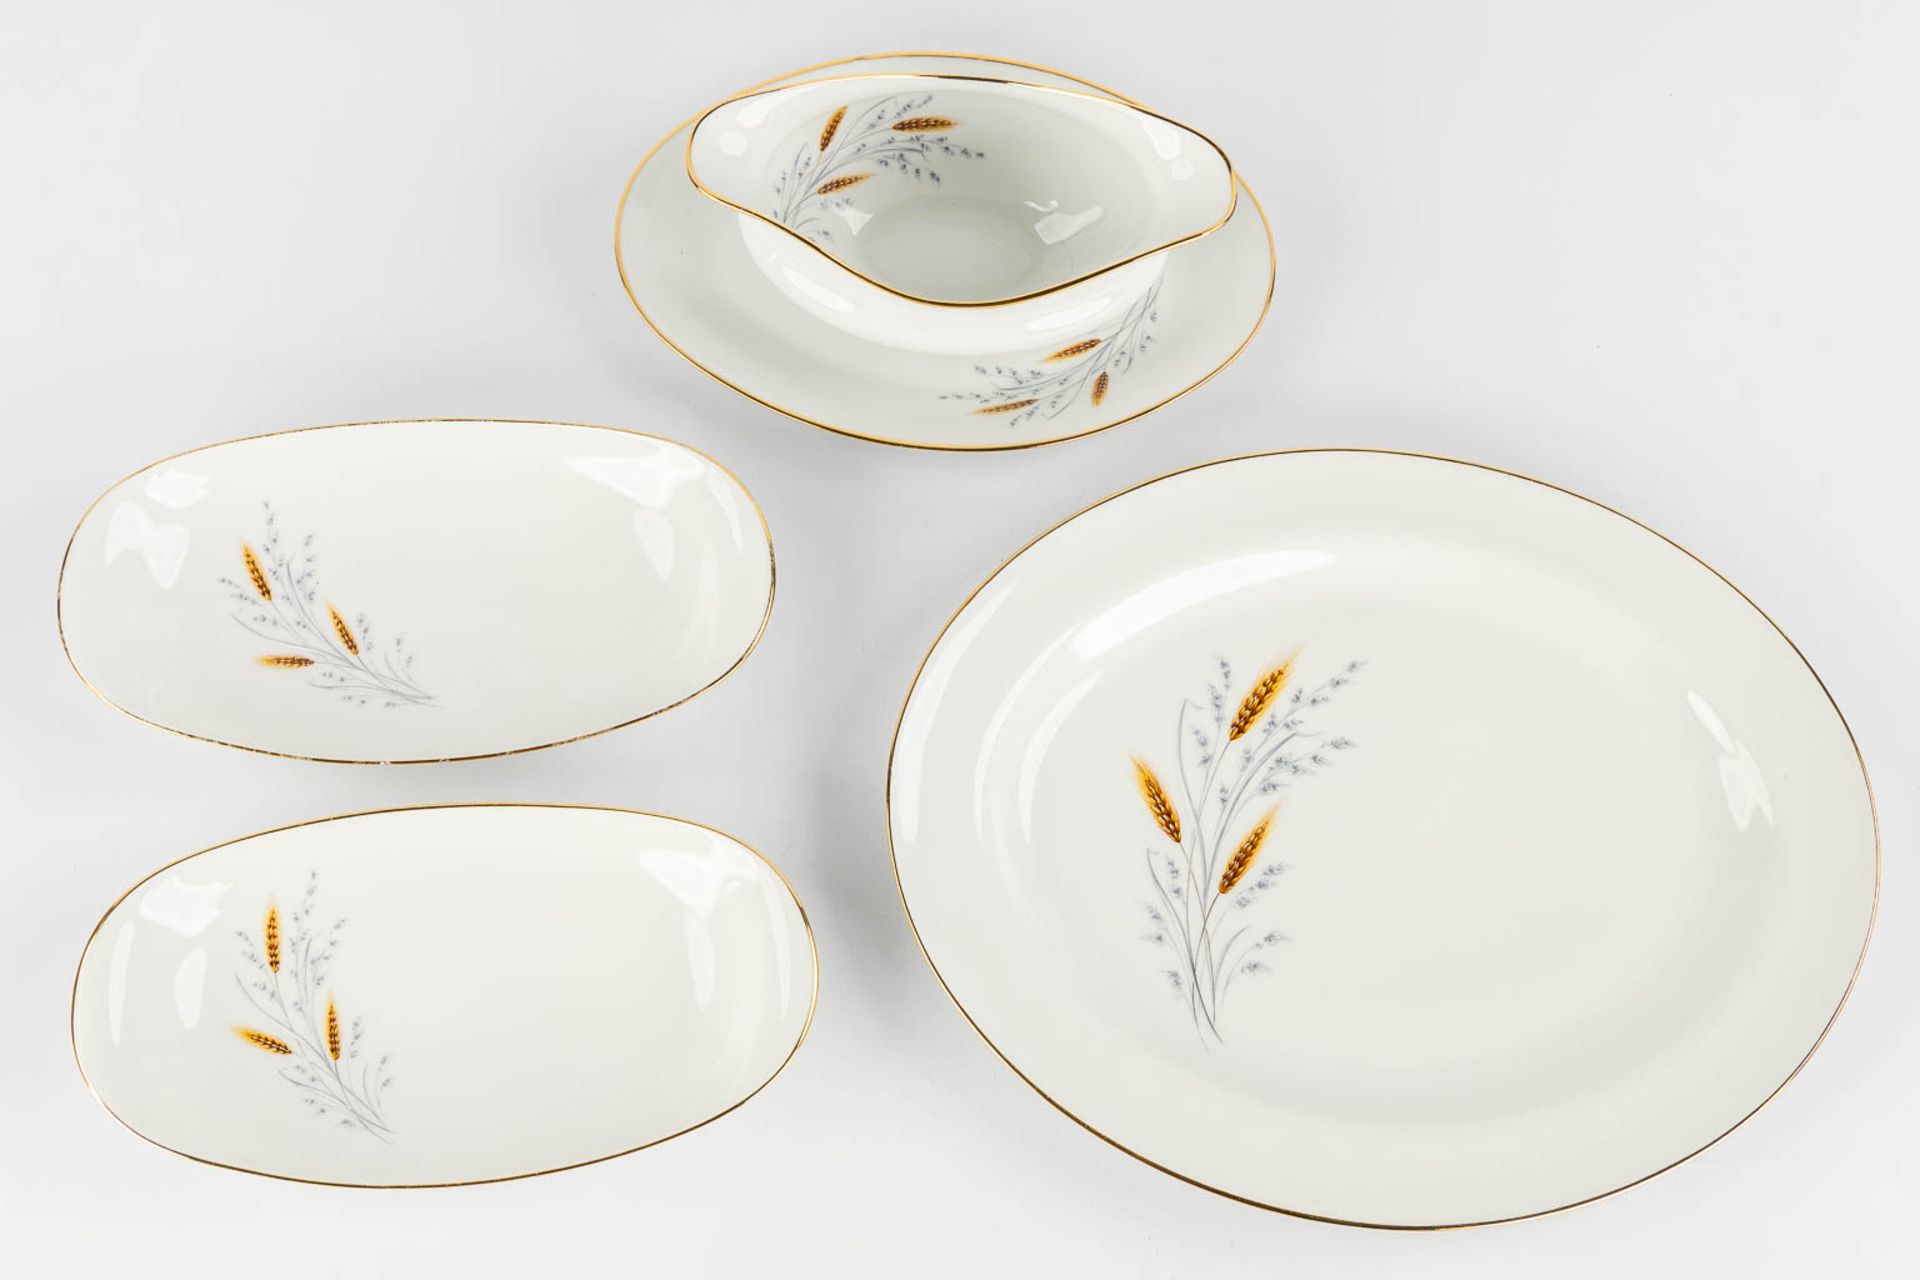 Limoges, France, a large, 12-person dinner, wild and coffee service. (L:23 x W:34 x H:22 cm) - Image 11 of 28